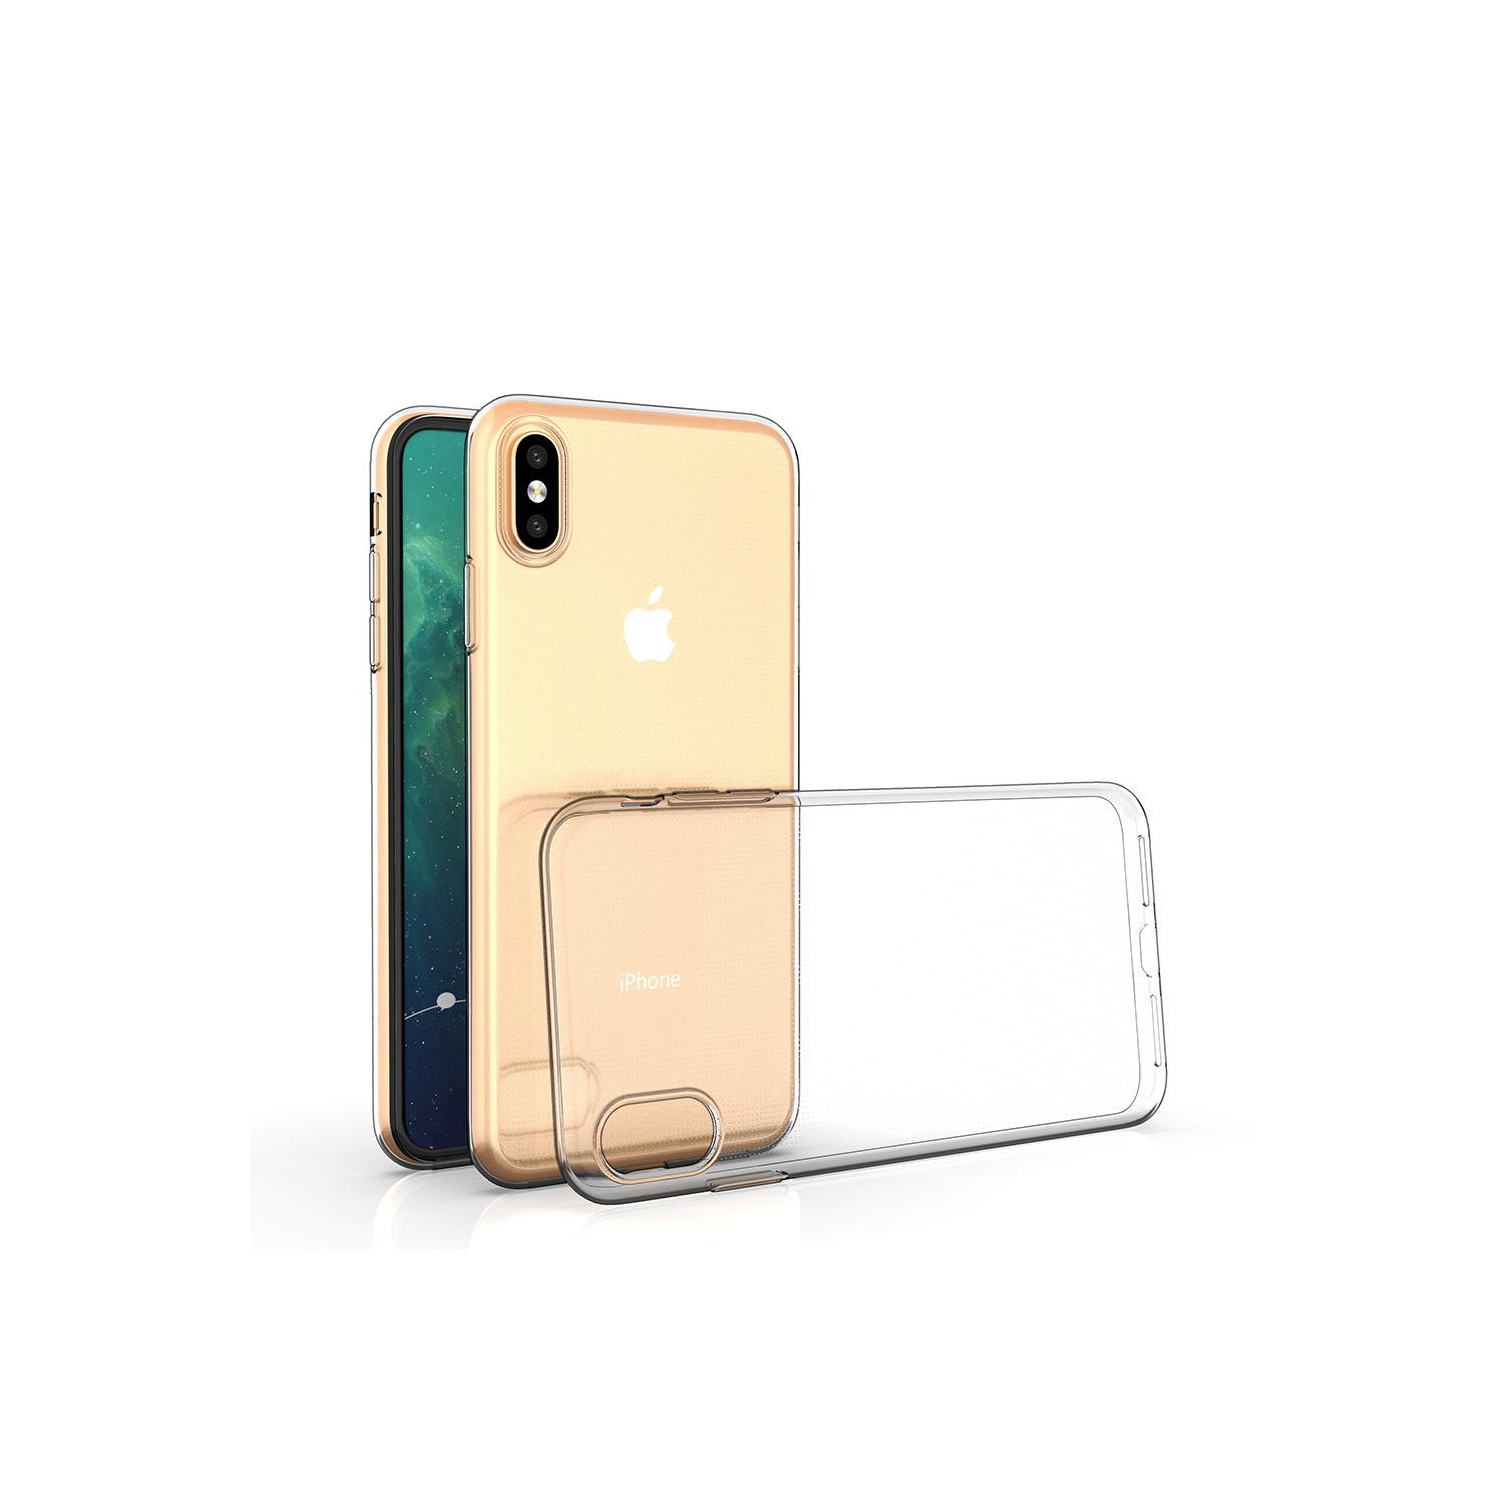 PANDACO Clear Case for iPhone X or iPhone XS